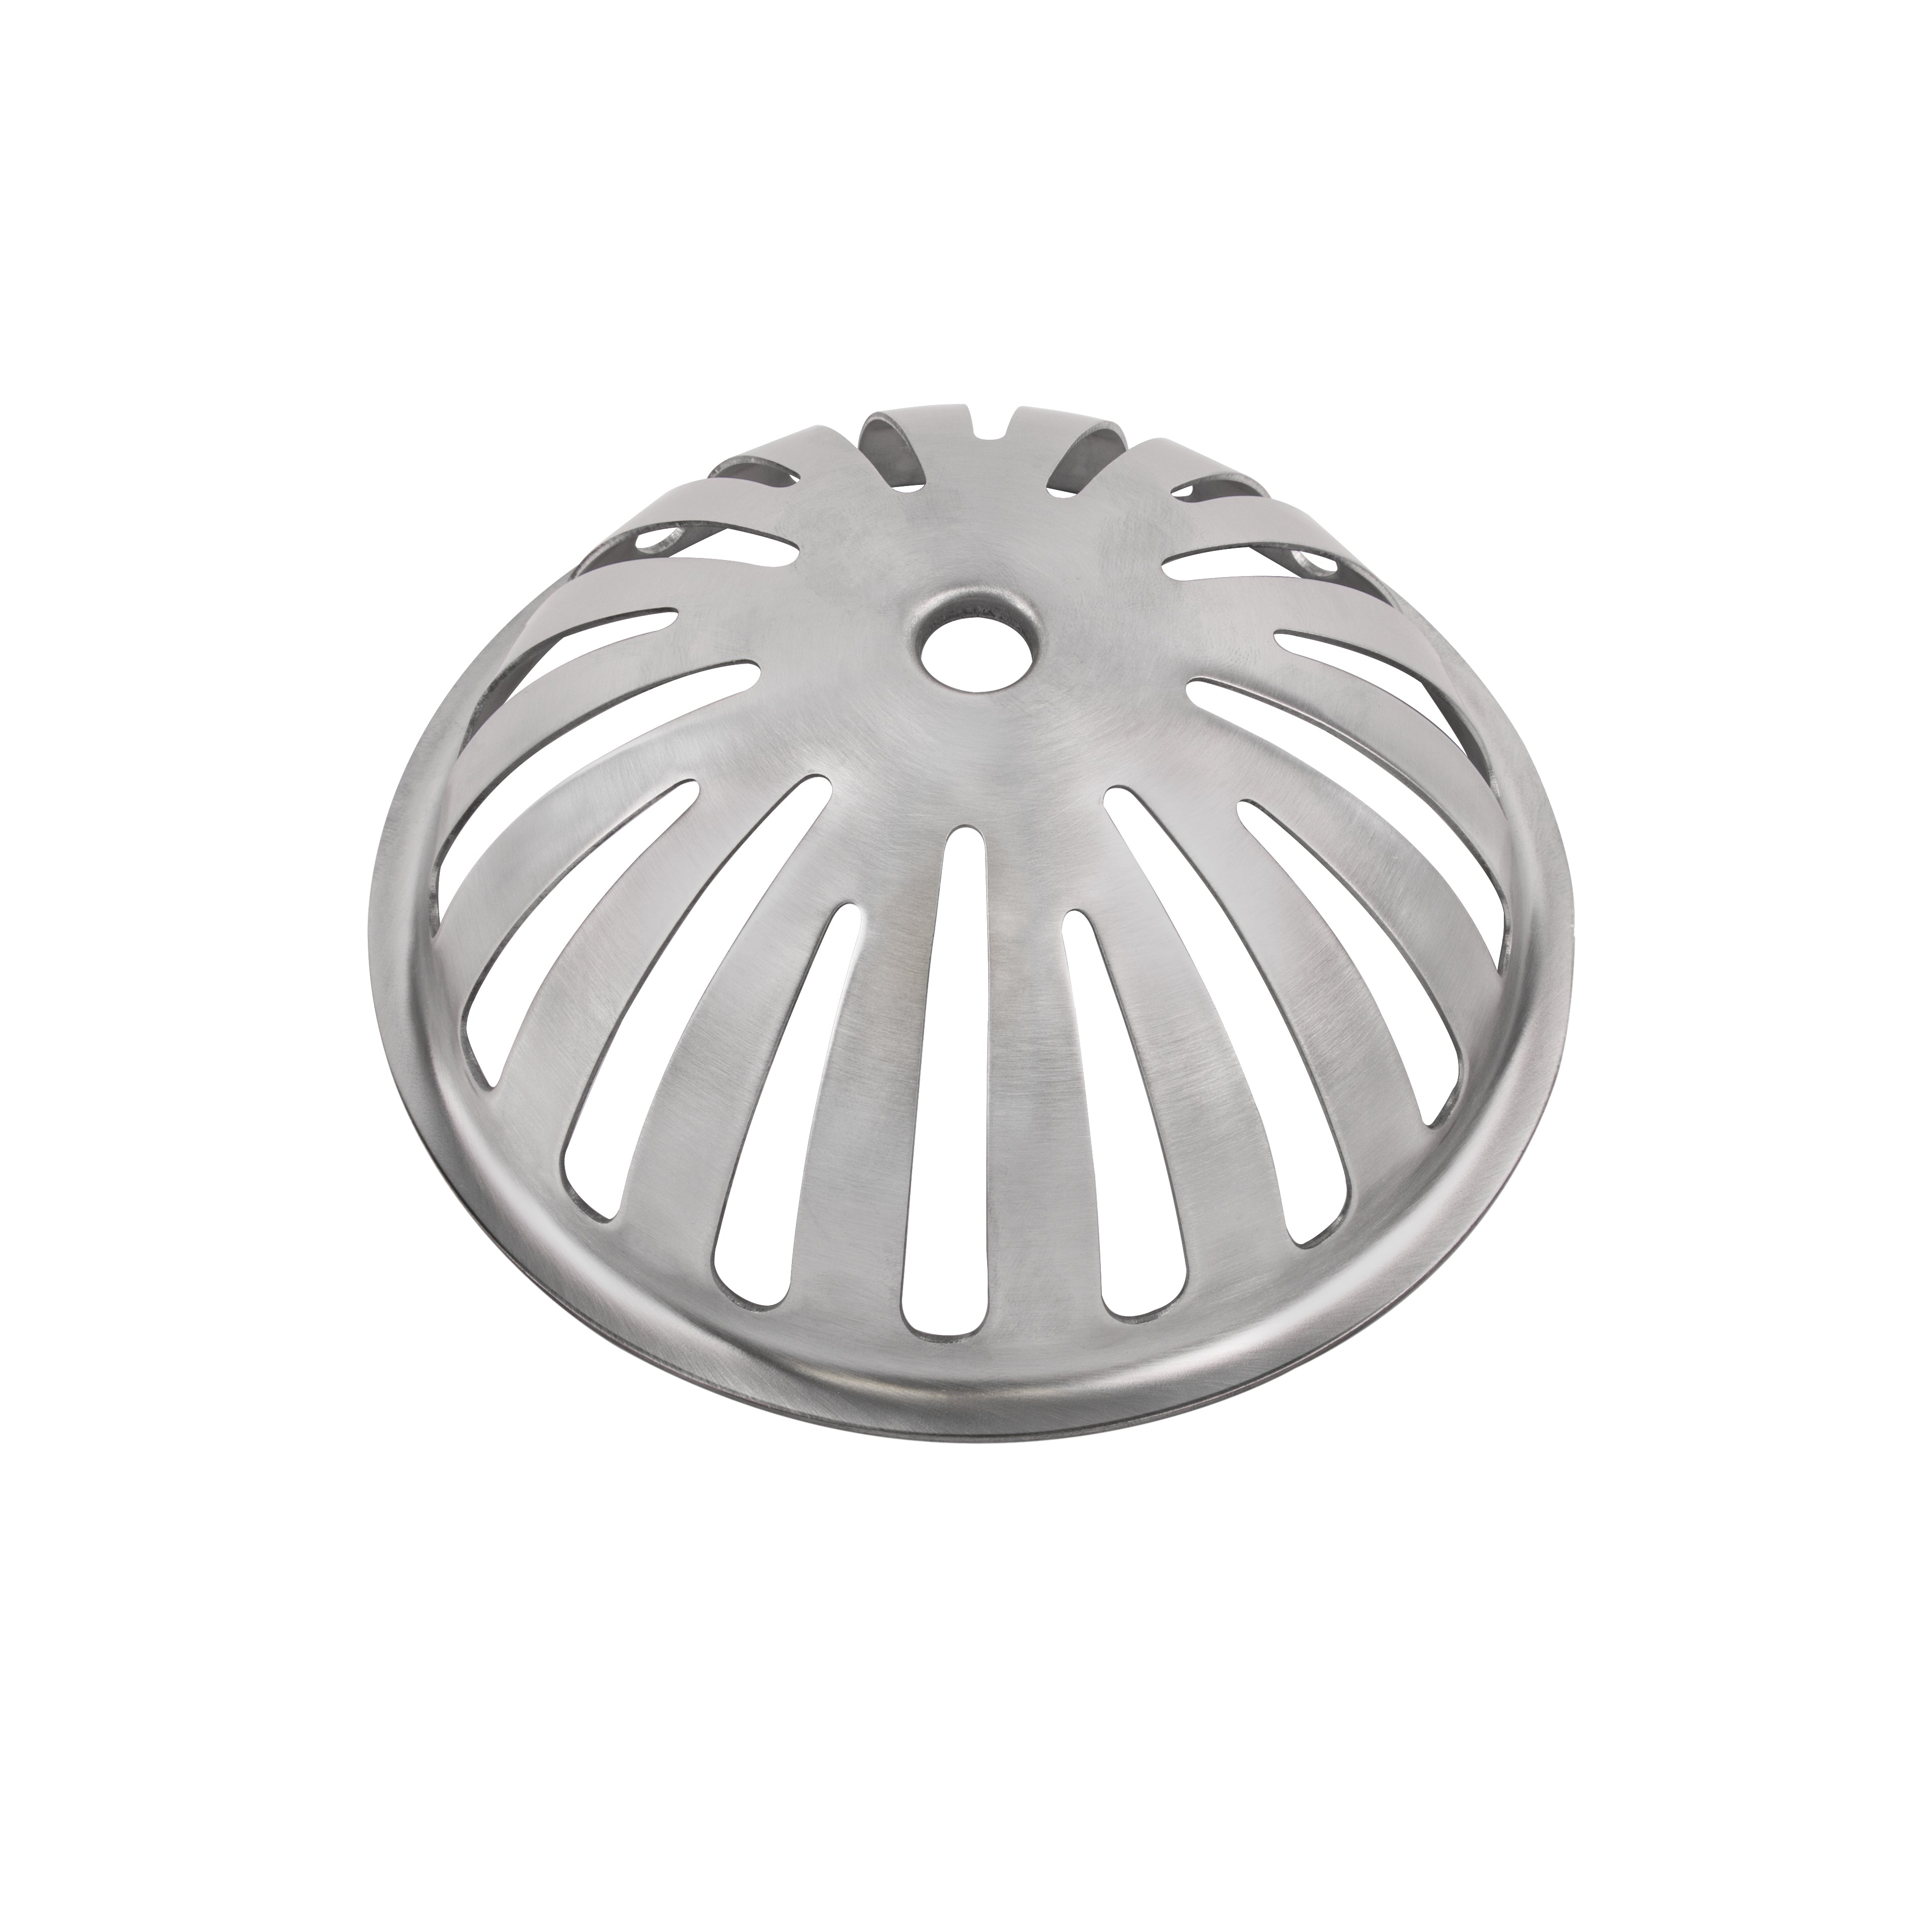 Leyso Type 304 Stainless Steel Heavy Duty Dome Strainer for 12" Floor Sink, 5-1/2" Diameter - Perfect for Restaurant, Bar, Buffet